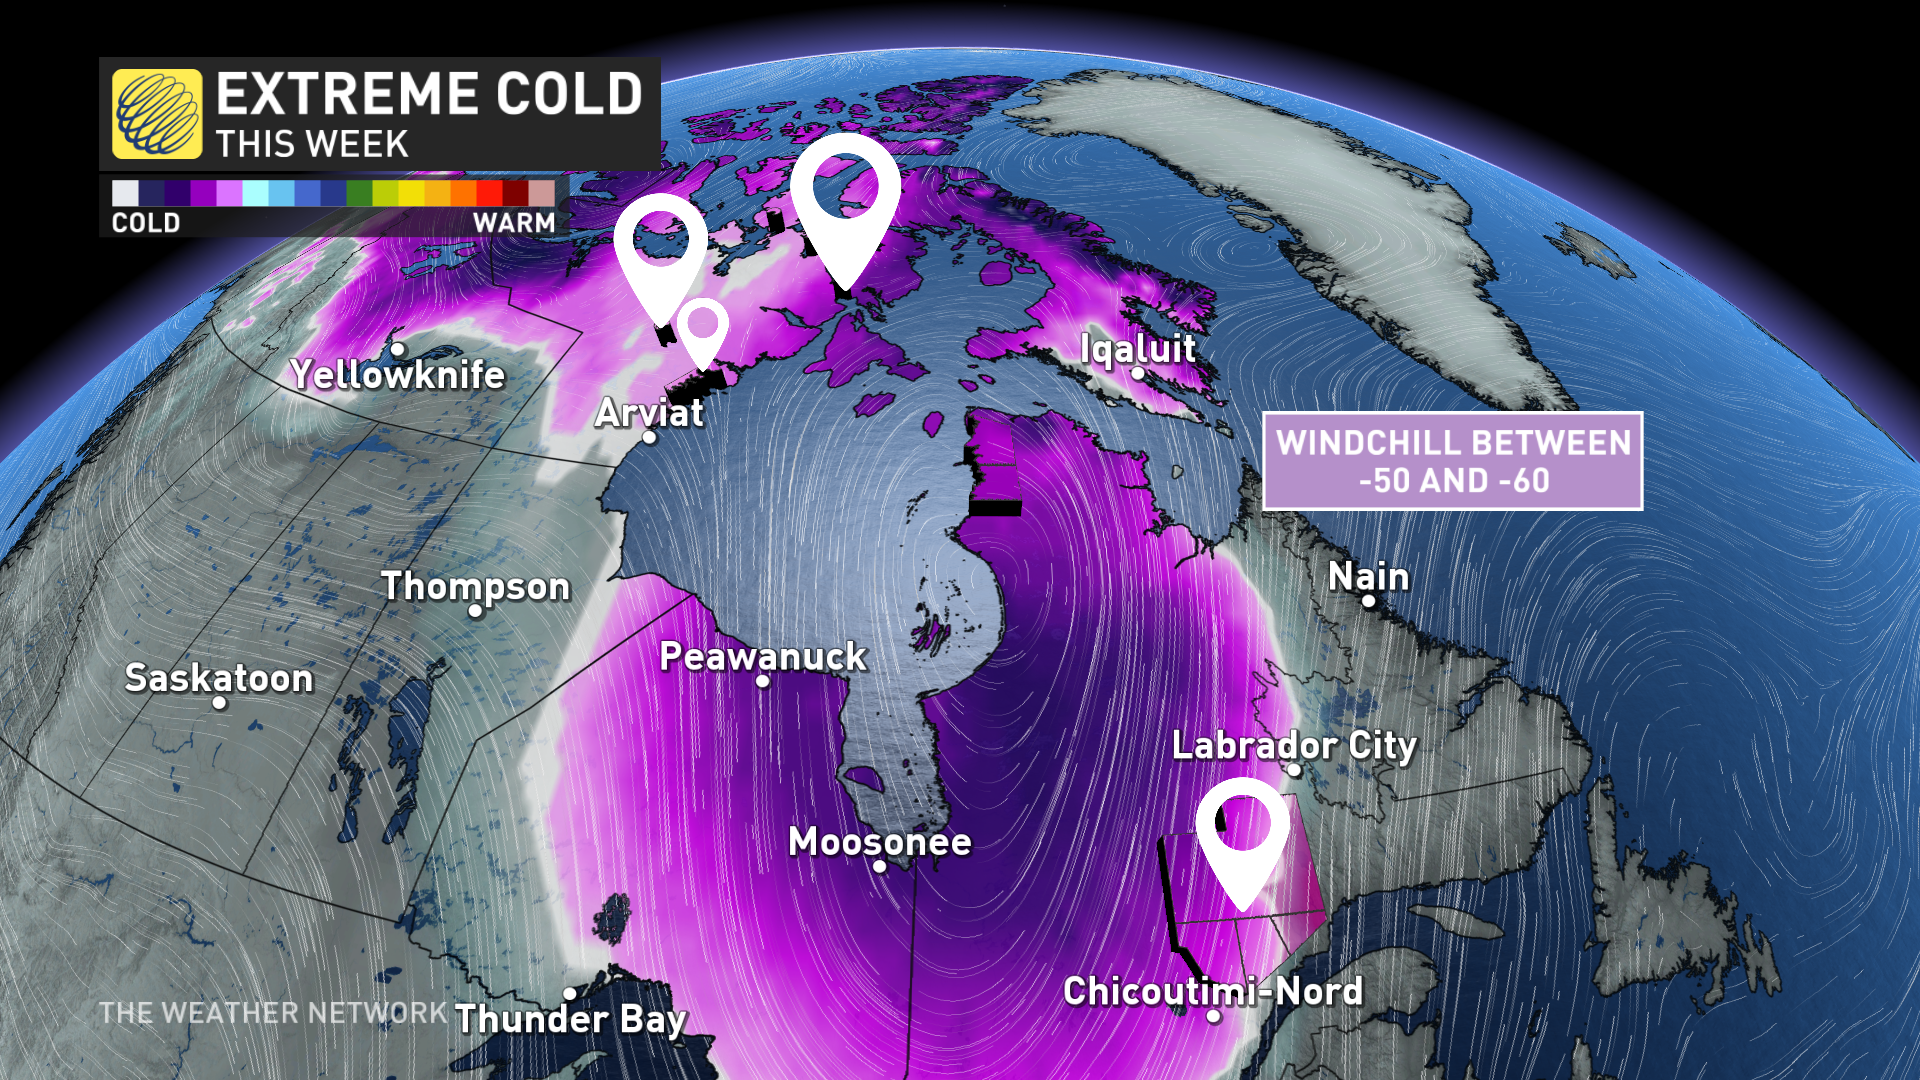 frostbite in minutes. dangerously cold wind chills of -60 hit canada's north